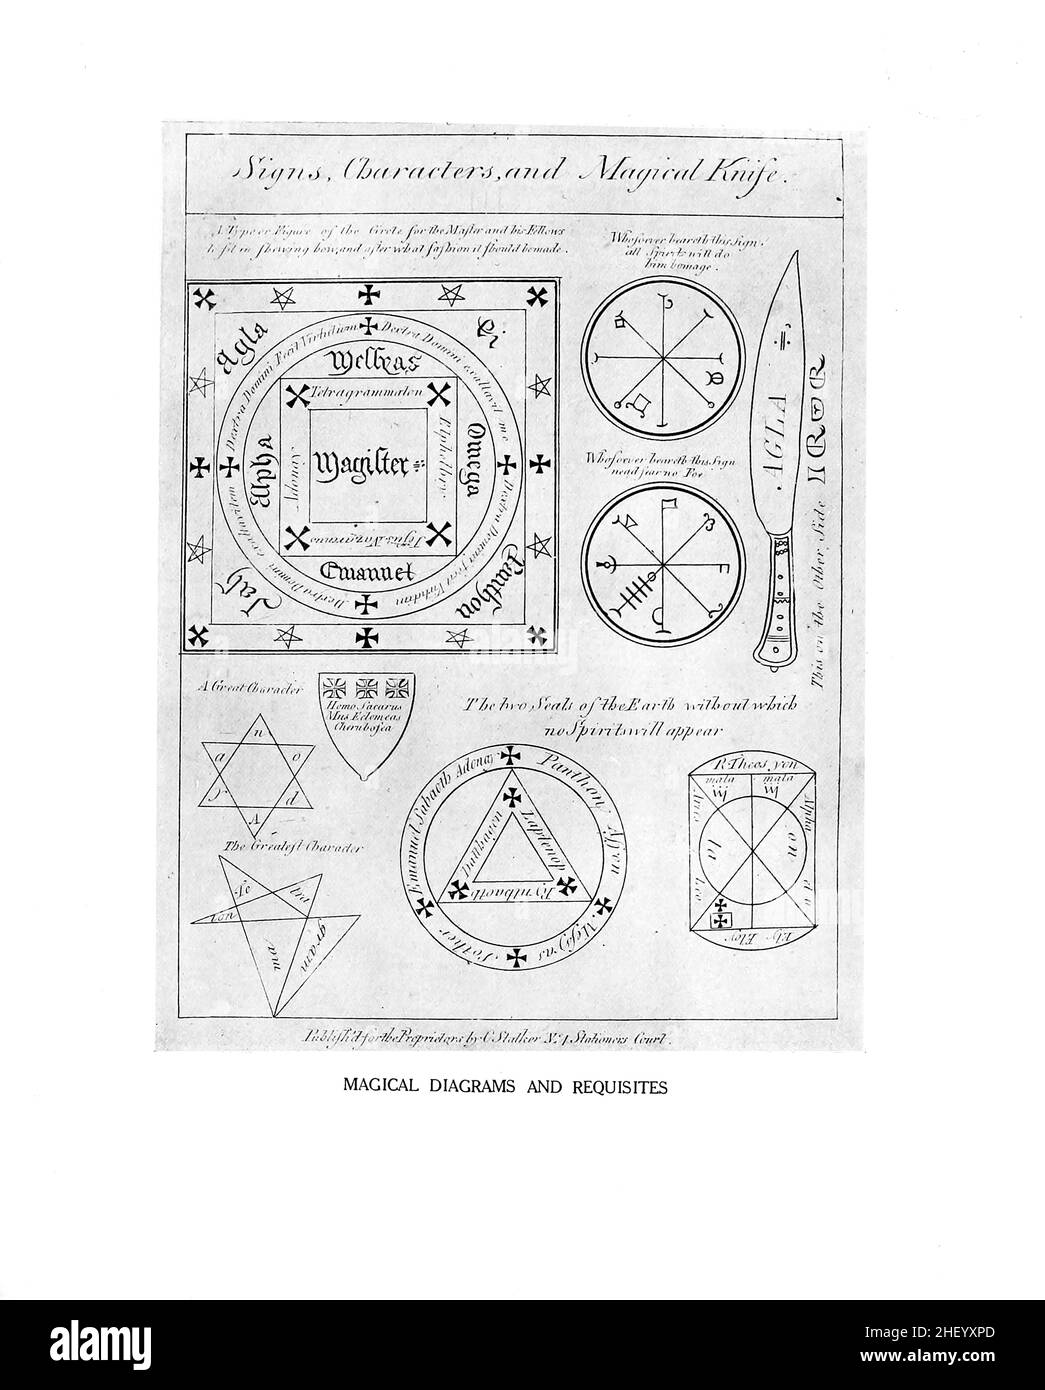 Magical Diagrams and Requisites from An encyclopaedia of occultism : a compendium of information on the occult sciences, occult personalities, psychic science, magic, demonology, spiritism and mysticism by Lewis Spence, Published in London by George Routledge & sons, ltd. in 1920 Stock Photo